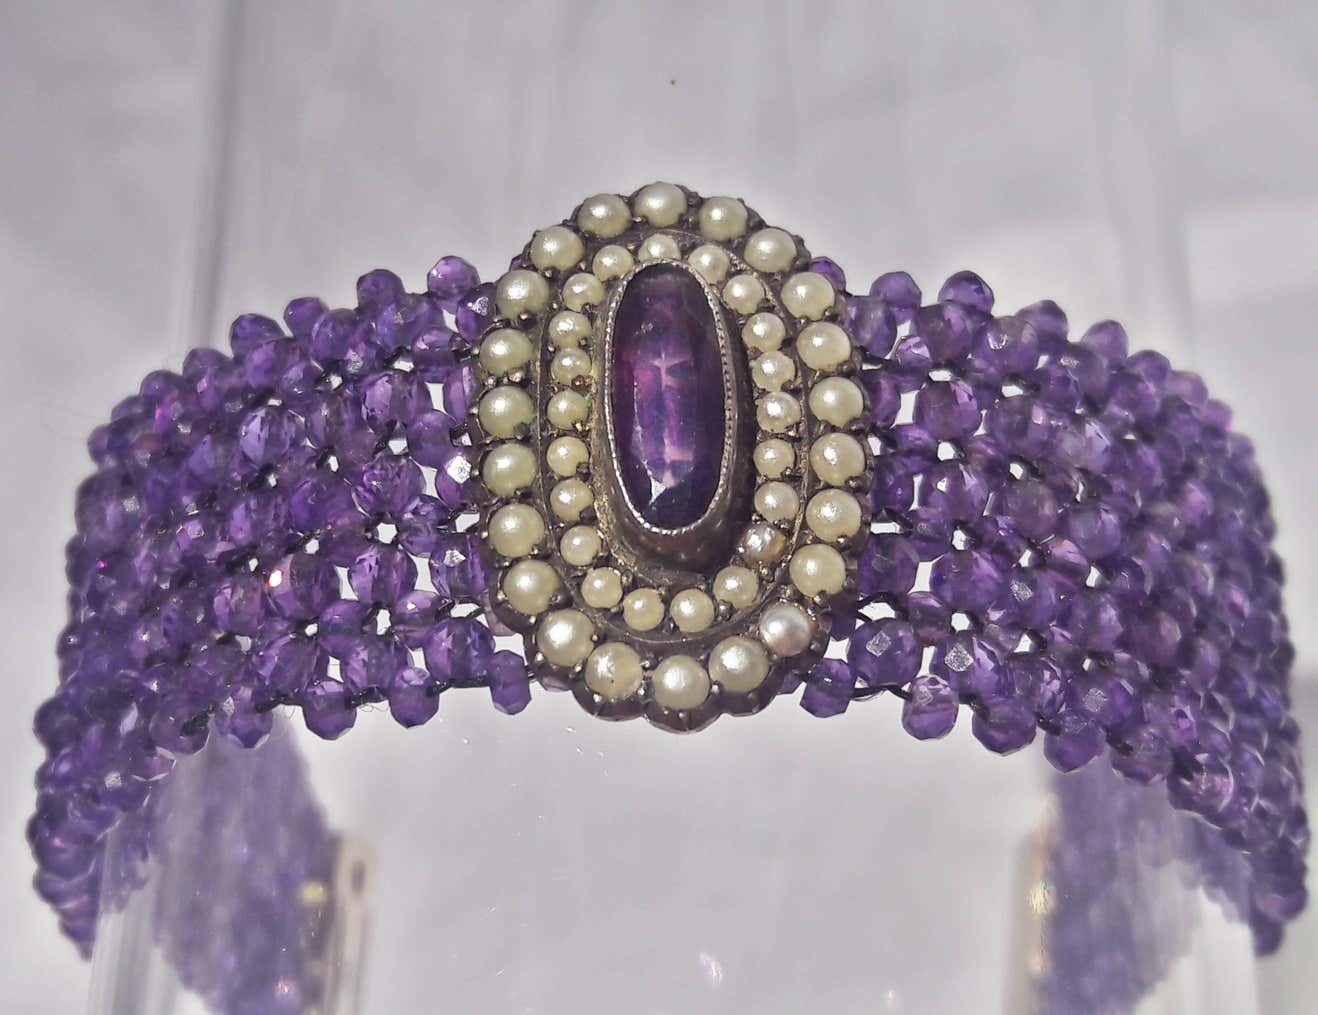 Woven Amethyst Beaded Bracelet with Silver Clasp & Centerpiece